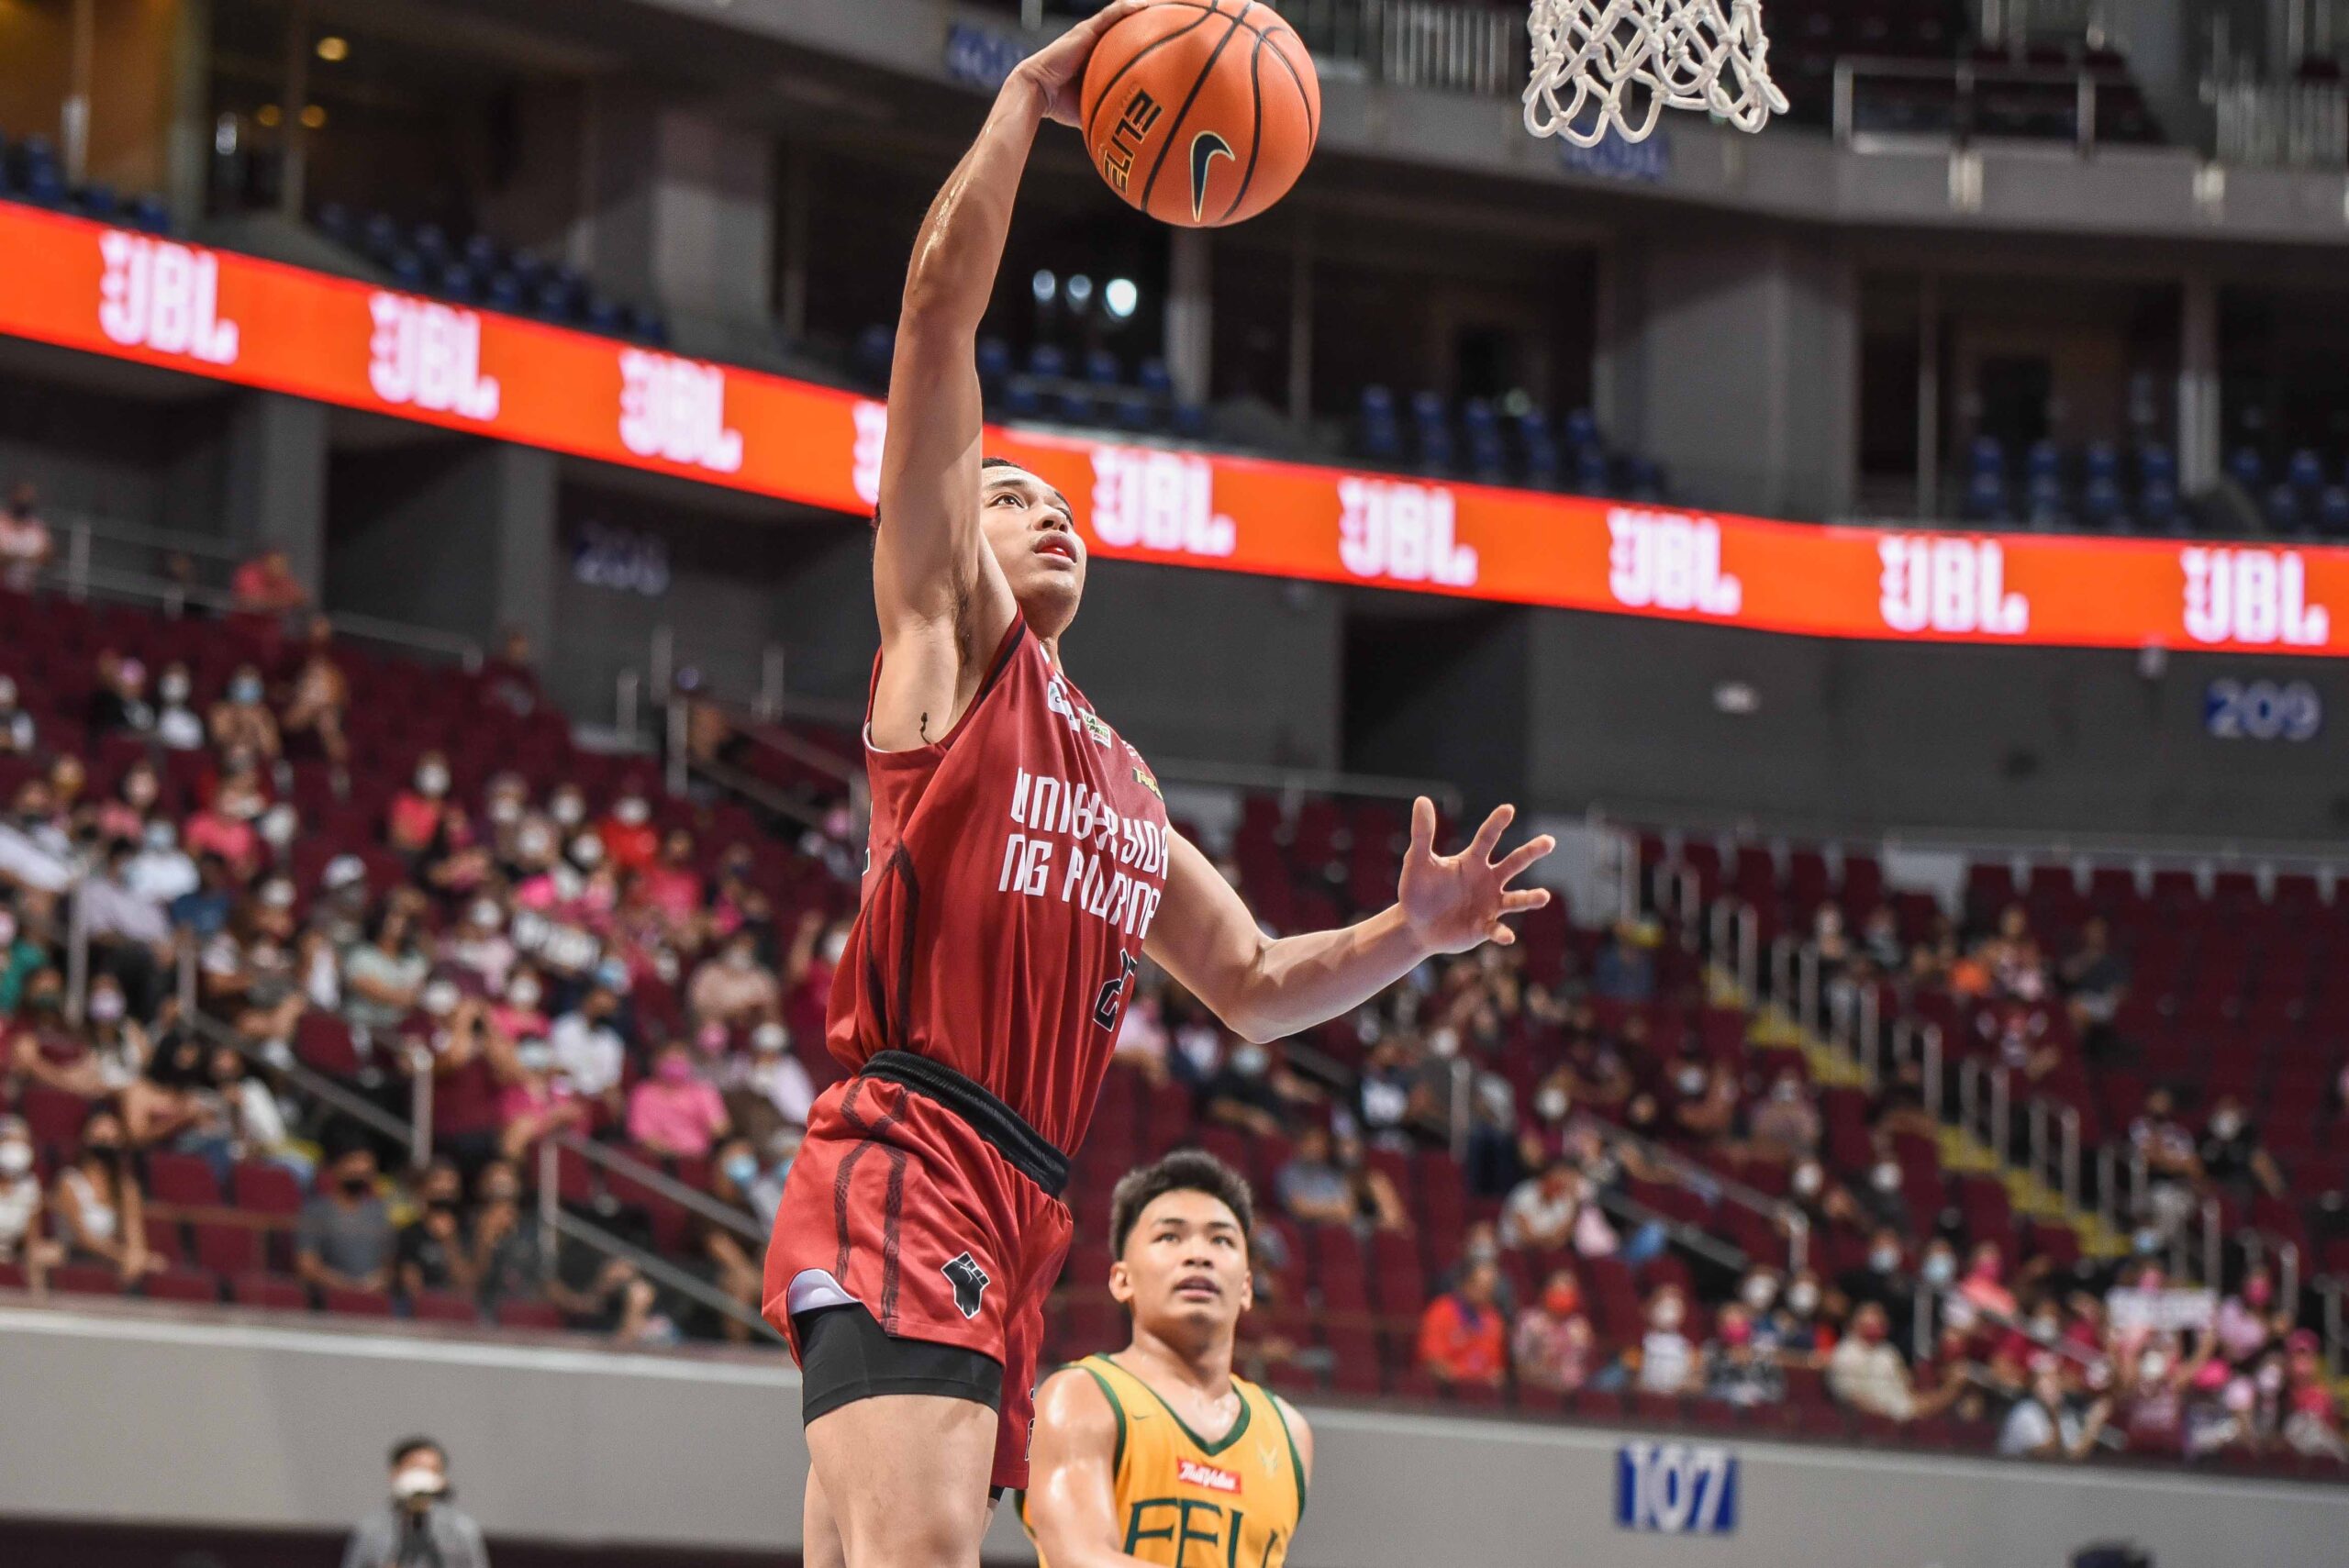 Rivero, Cansino, and Tamayo Score Double Digits to Lift UP Past FEU